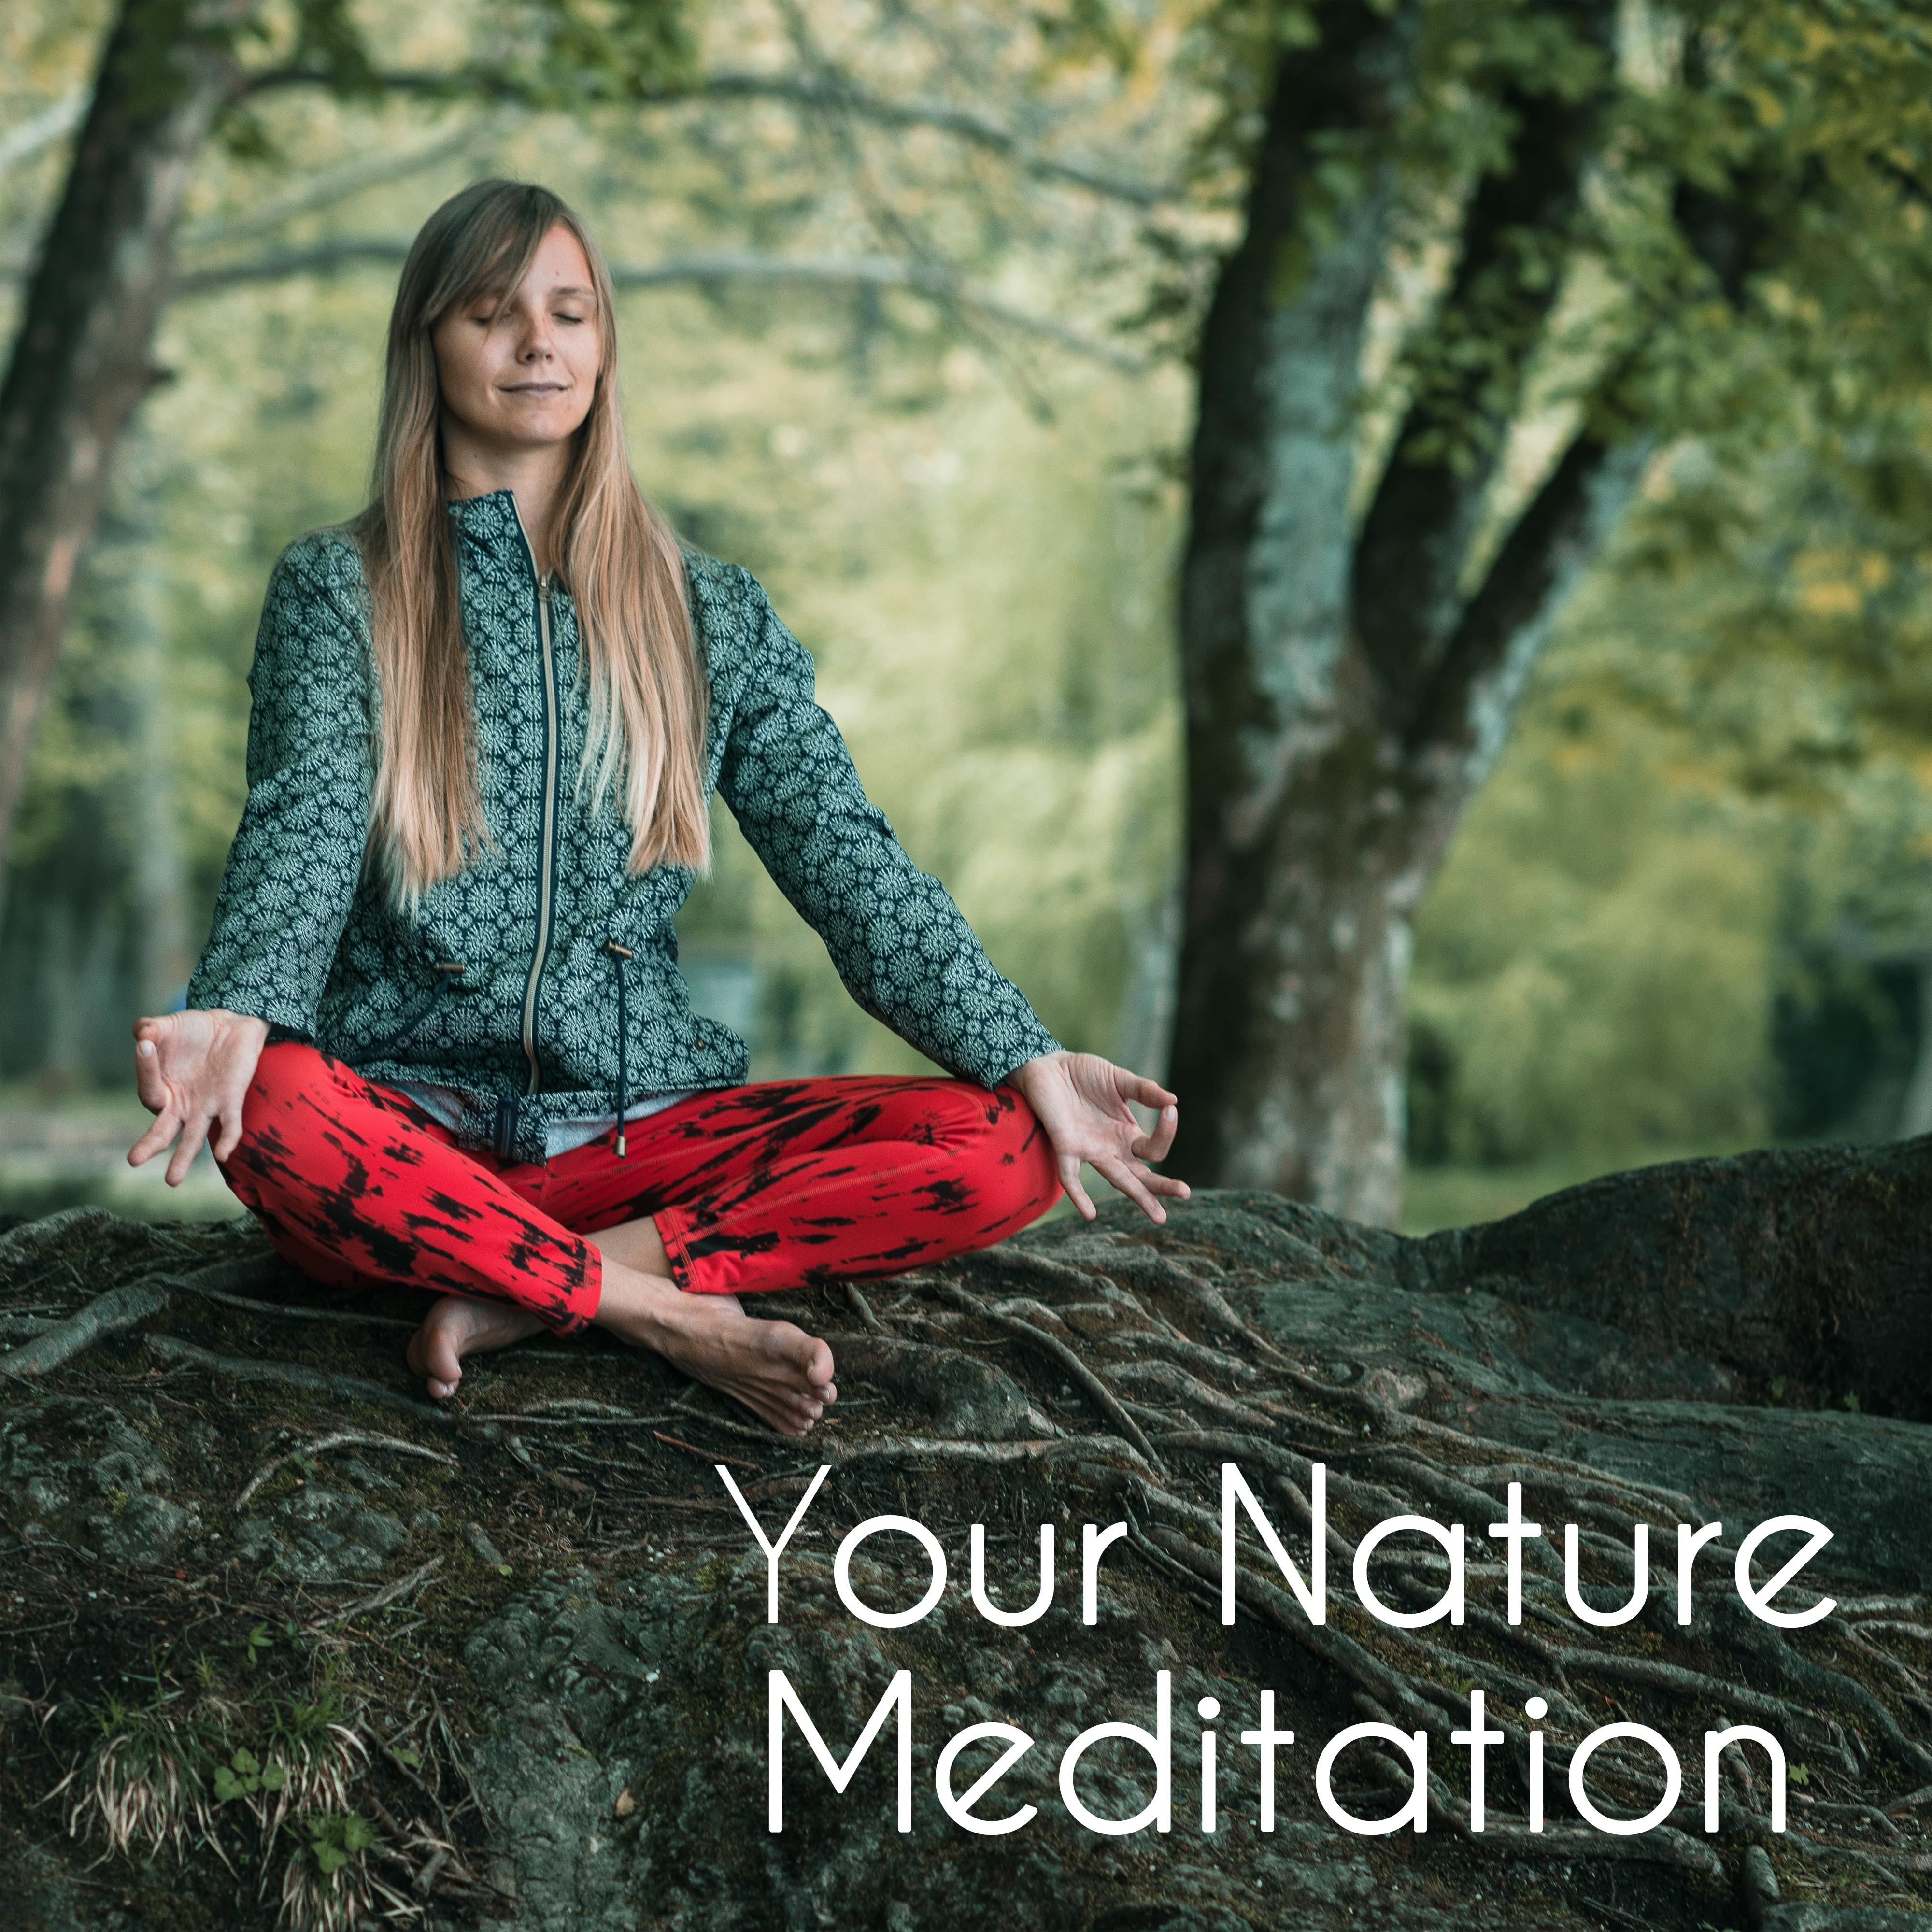 Your Nature Meditation – New Age Serenity Nature Sounds for Rest, Inner Harmony, Relax & Focus